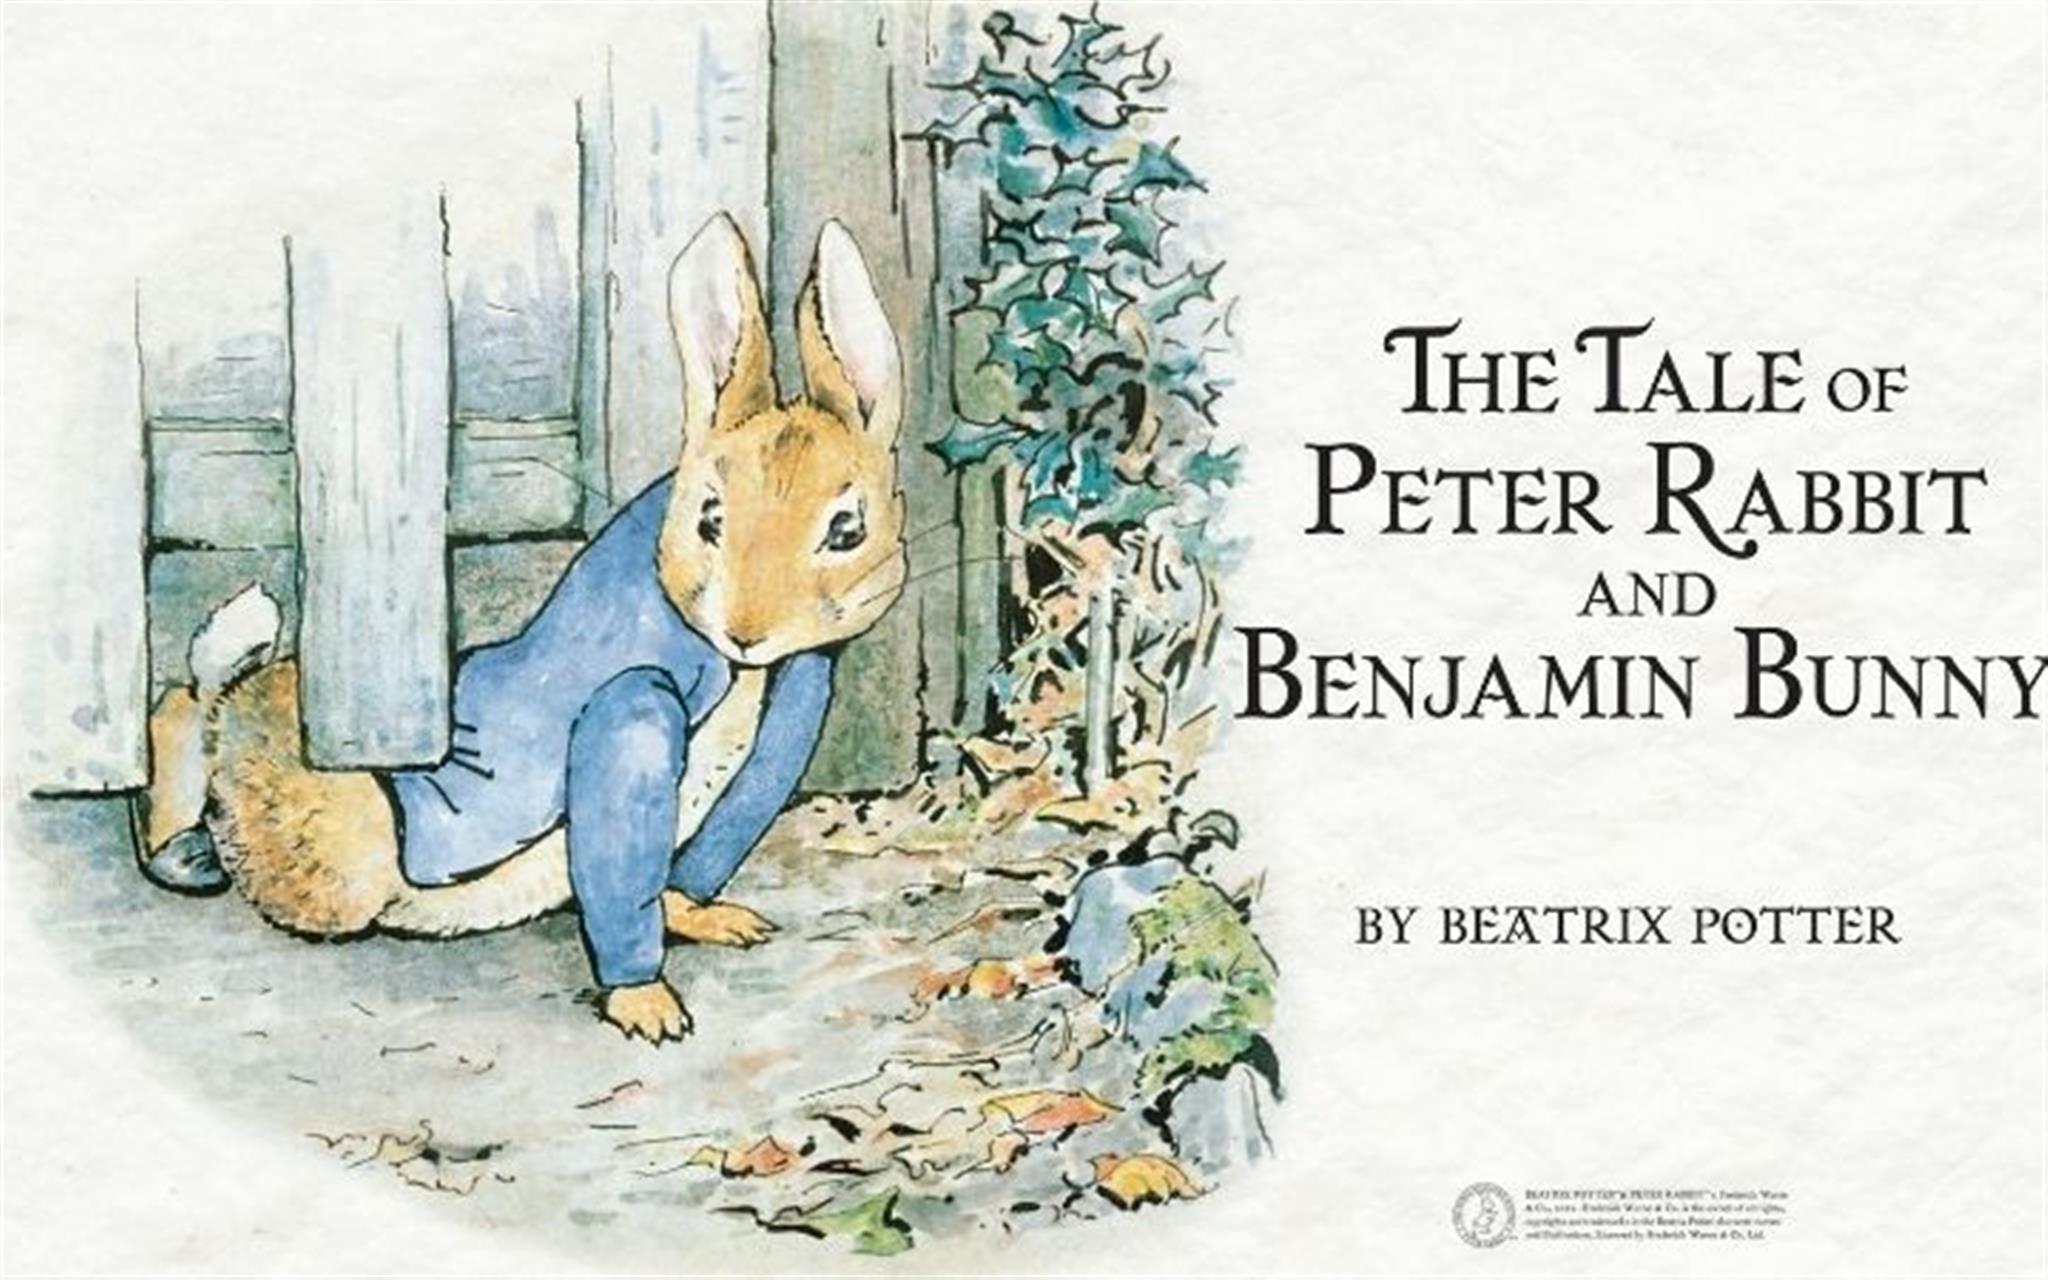 Theatre in the Parks  – The Tale of Peter Rabbit and Benjamin Bunny - West Stow image